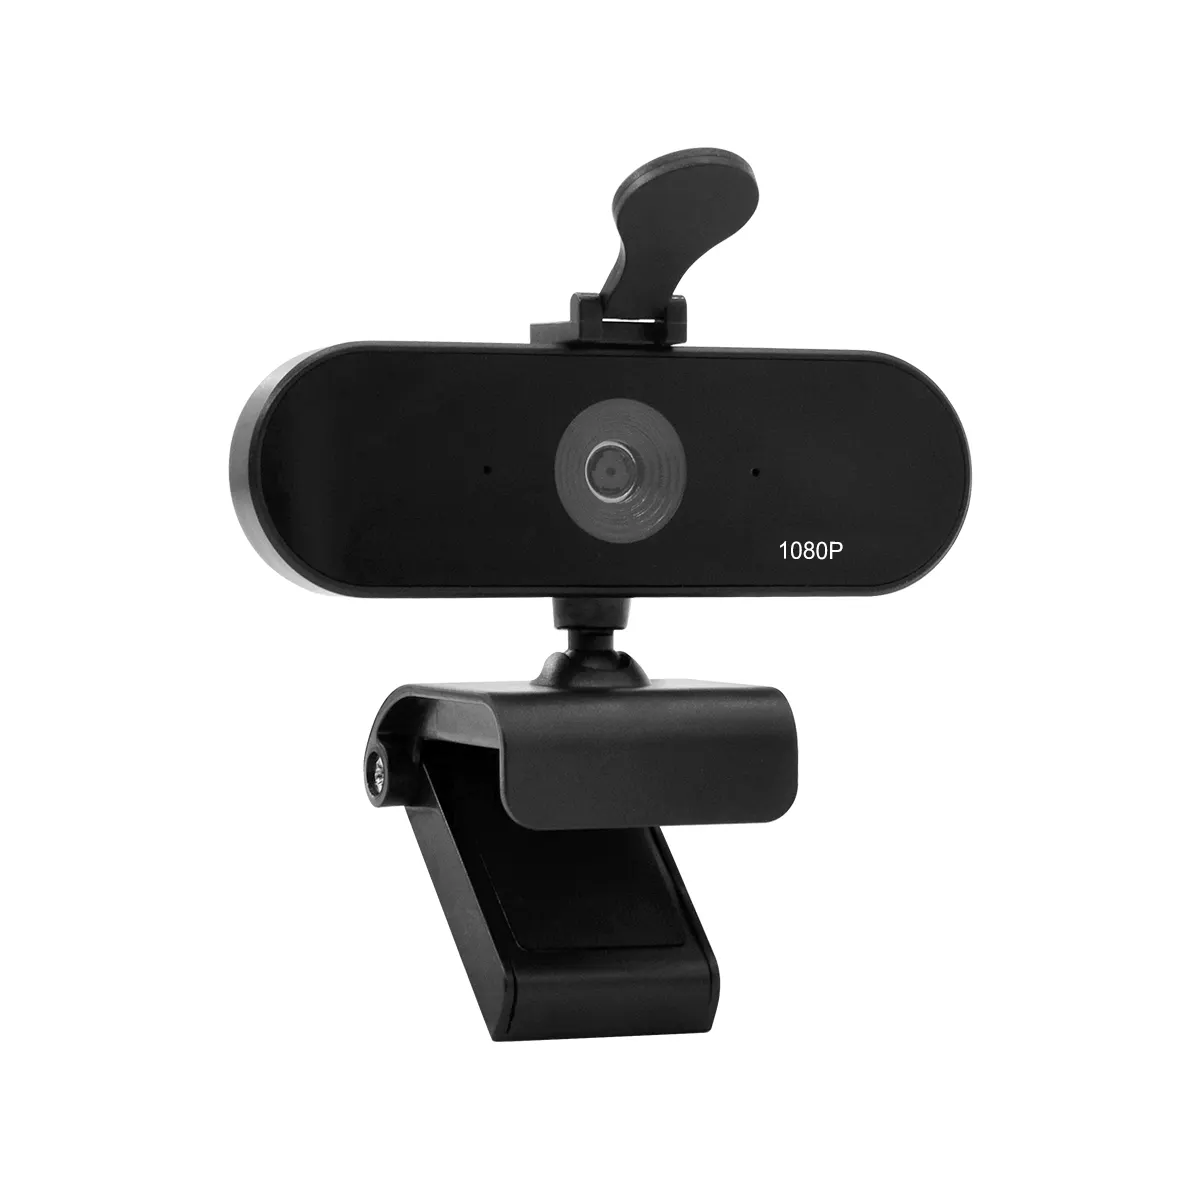 High Definition Rotatable Webcams Computer Web Cam 1080P webcam with Mic Microphone for PC Laptop